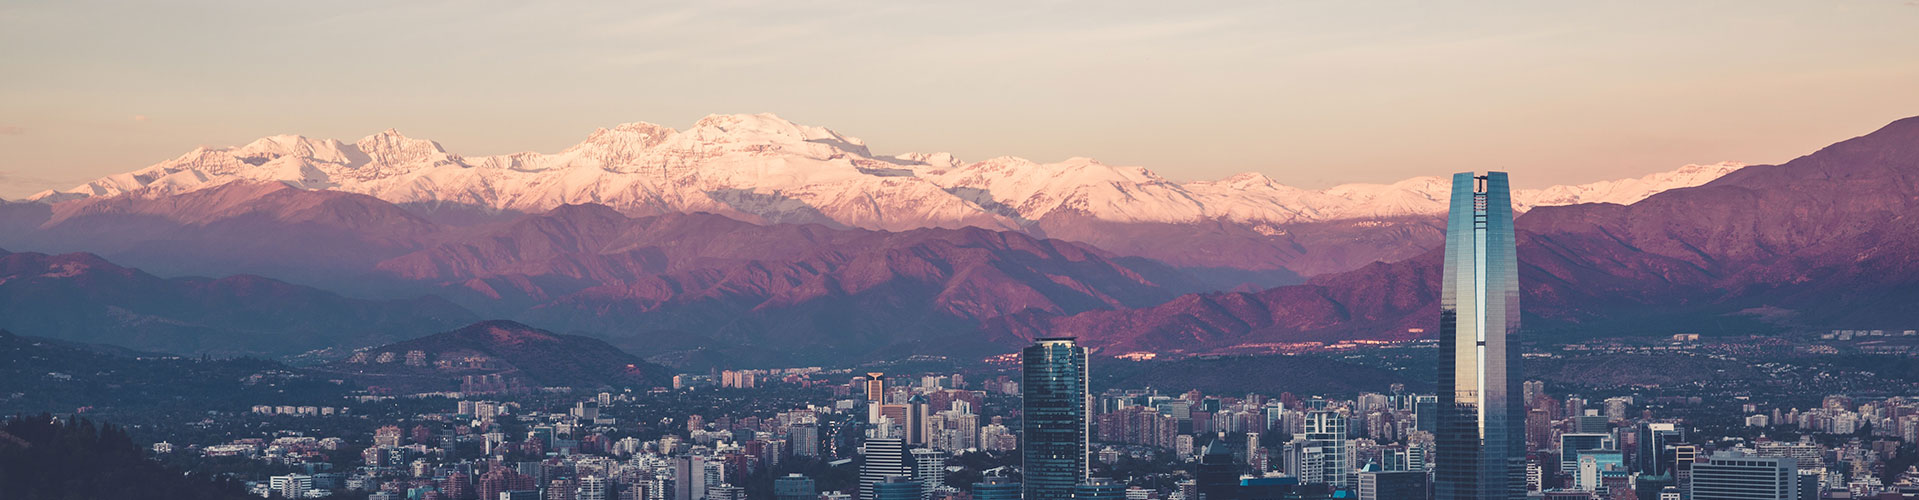 The city of Santiago below the snowcapped peaks of the Andes Mountain Range in Chile.